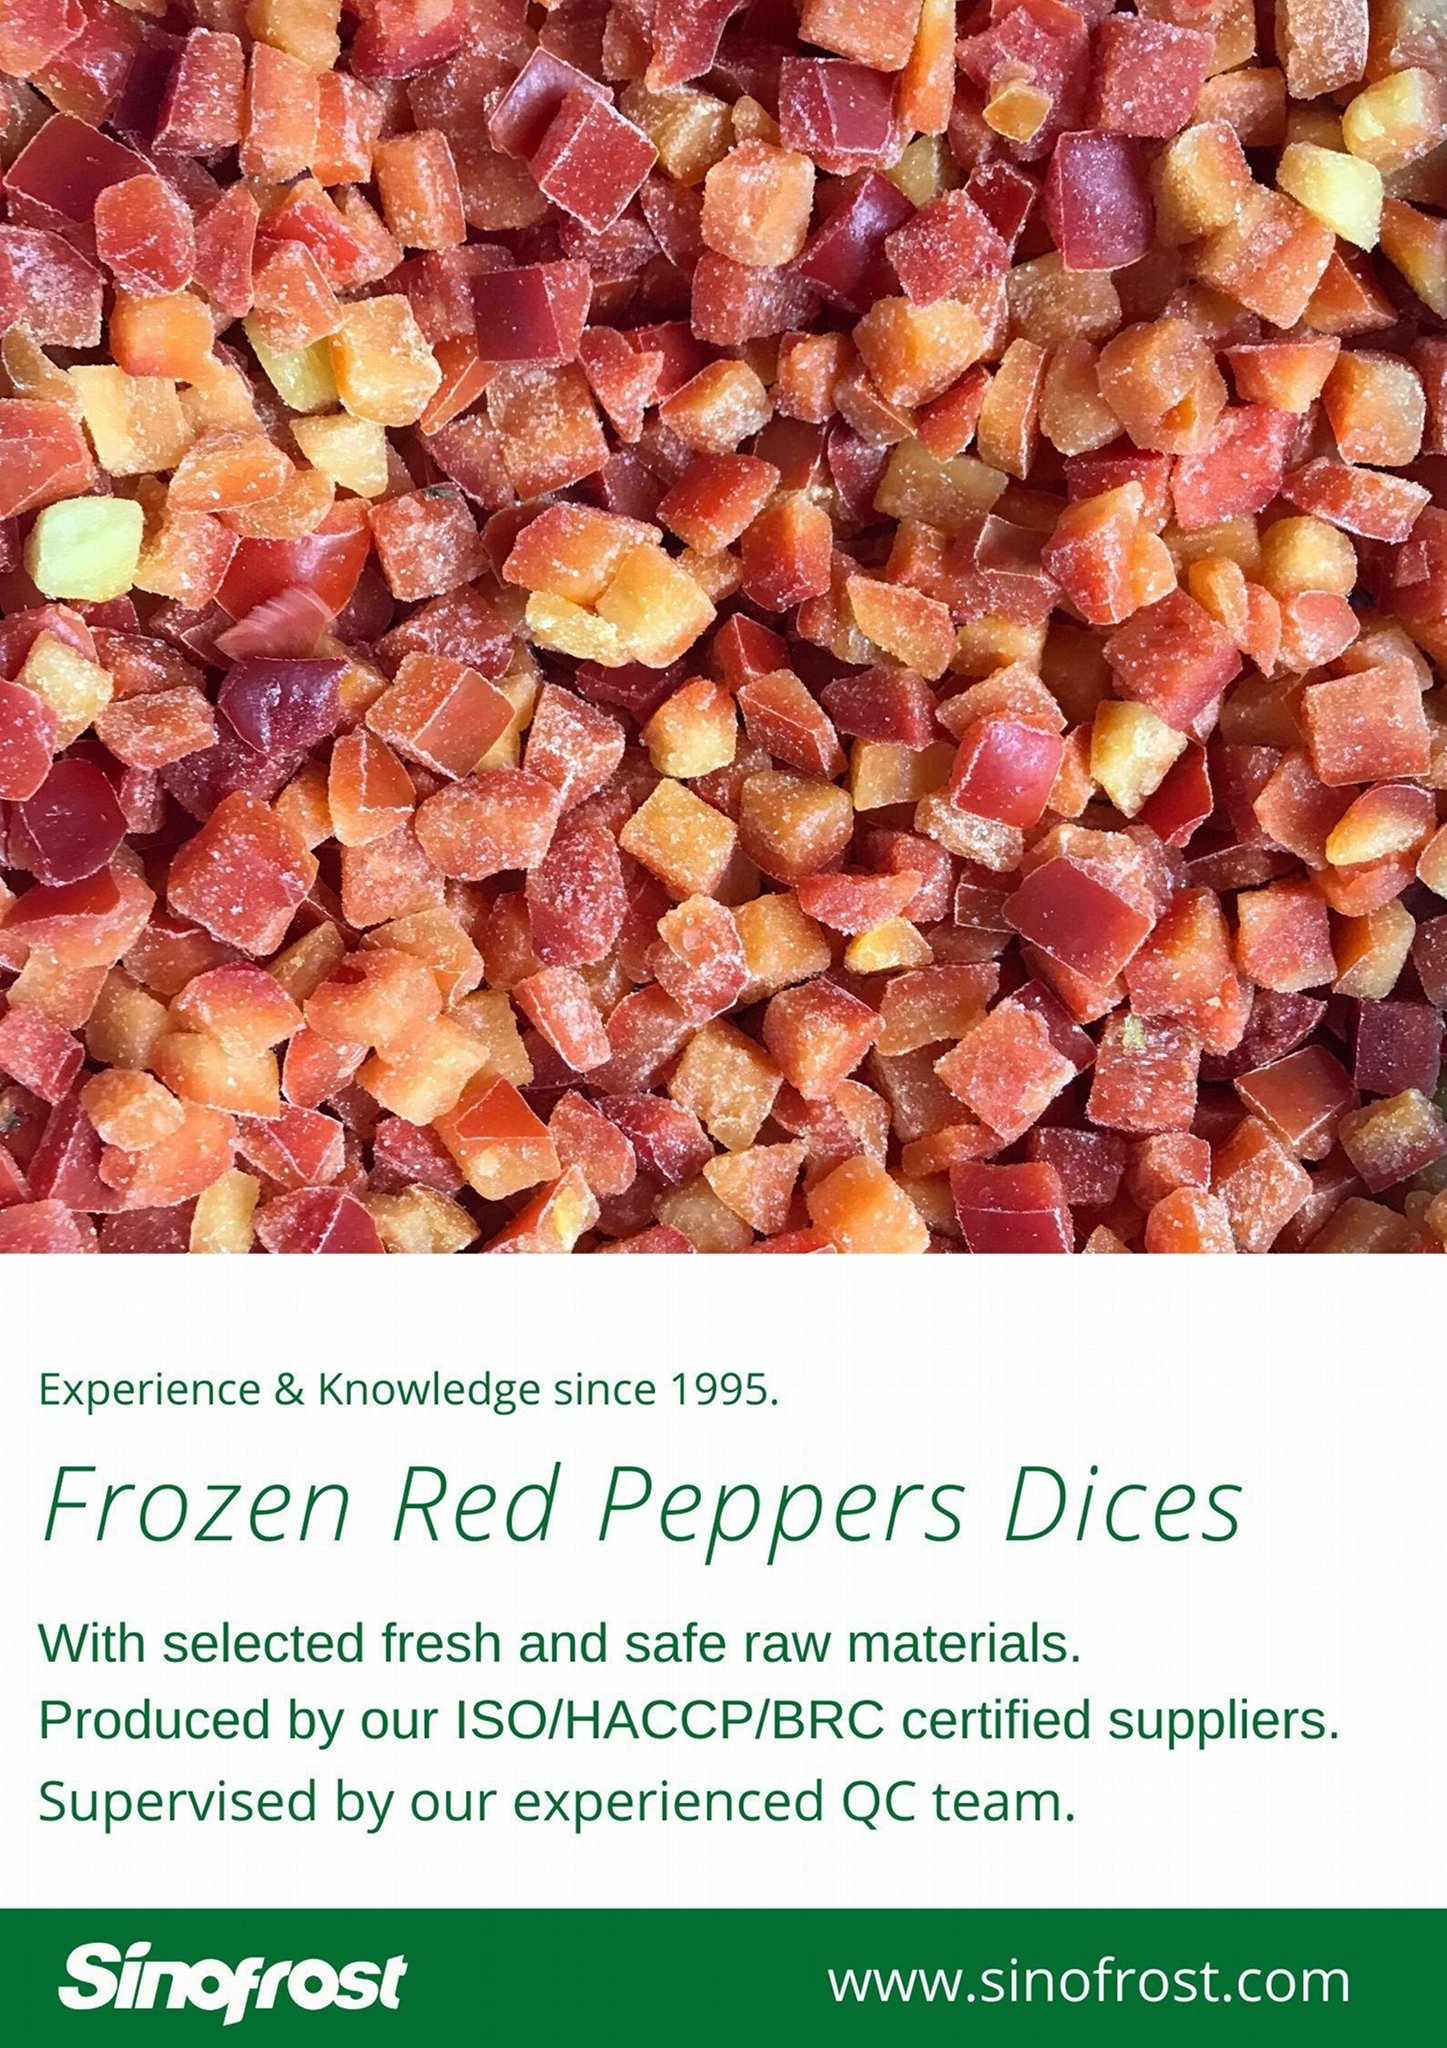 IQF Red Peppers Dices,Frozen Red Pepper Dices,IQF Red Pepper Cubes 2